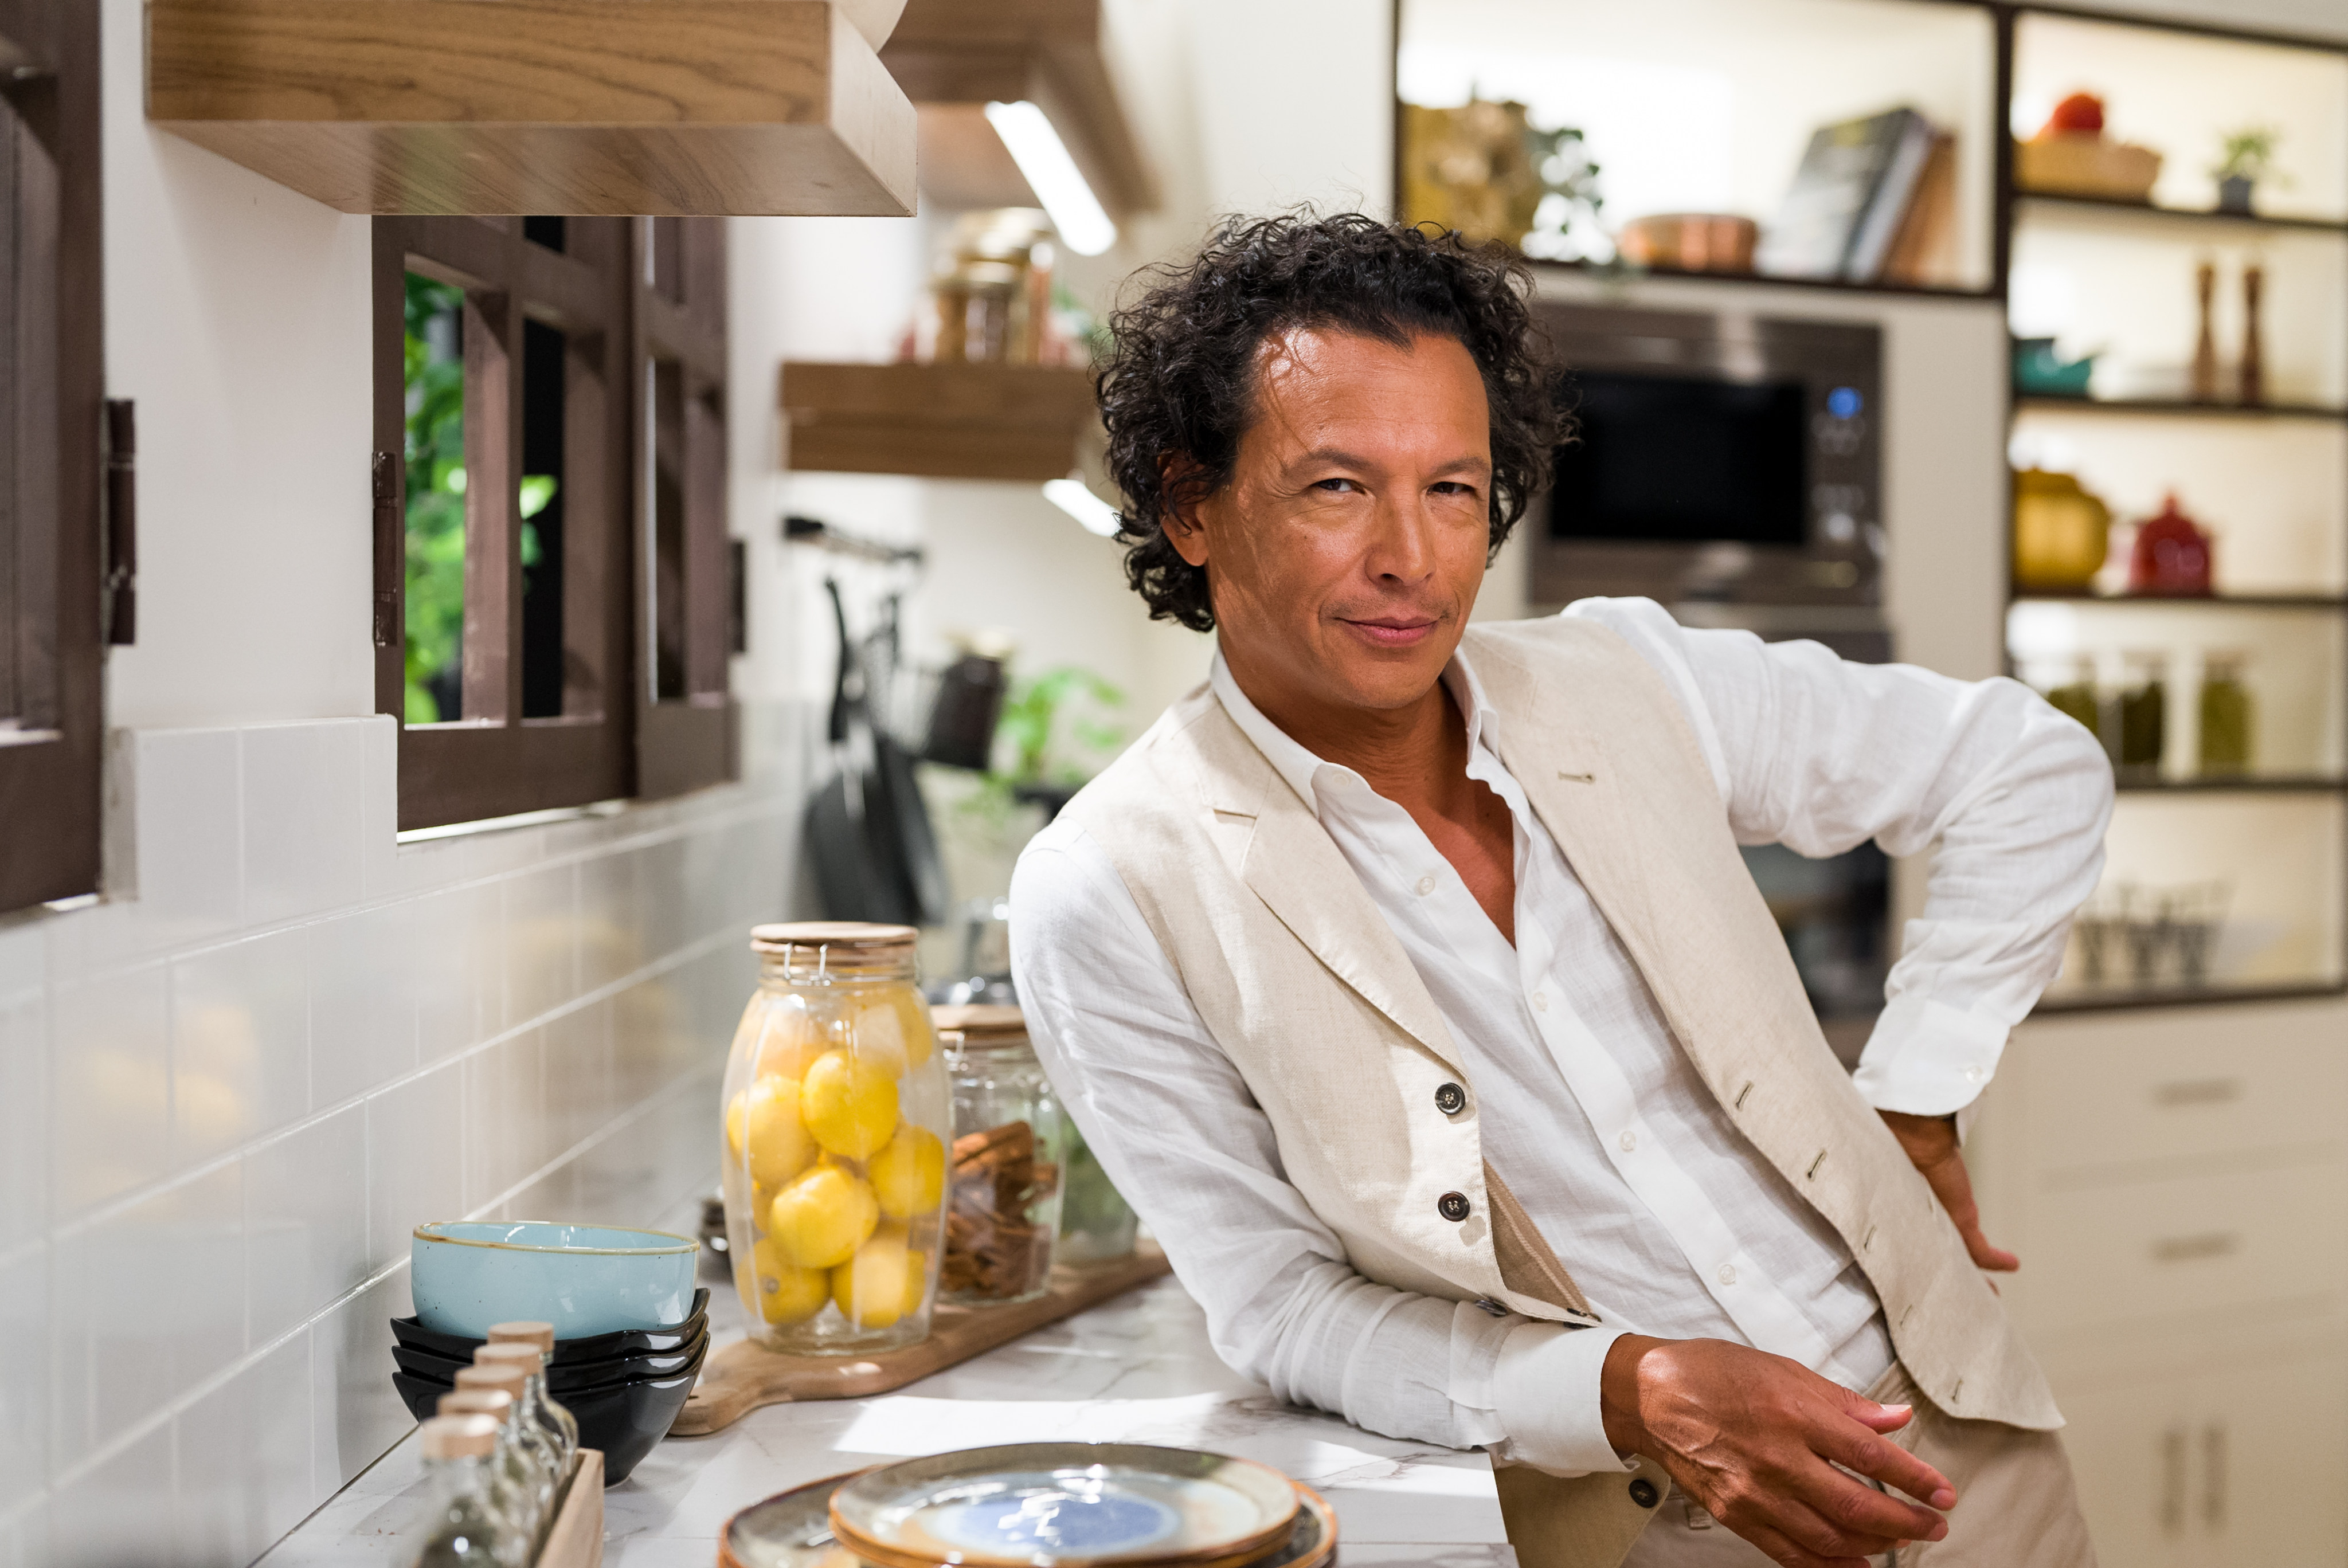 Bobby Chinn, former host of World Cafe on TLC and a judge on Top Chef Middle East, is back in Asia to cook “ridiculously tasty” Egyptian cuisine at the first Hong Kong Egyptian Food Festival. Photo: Bobby Chinn